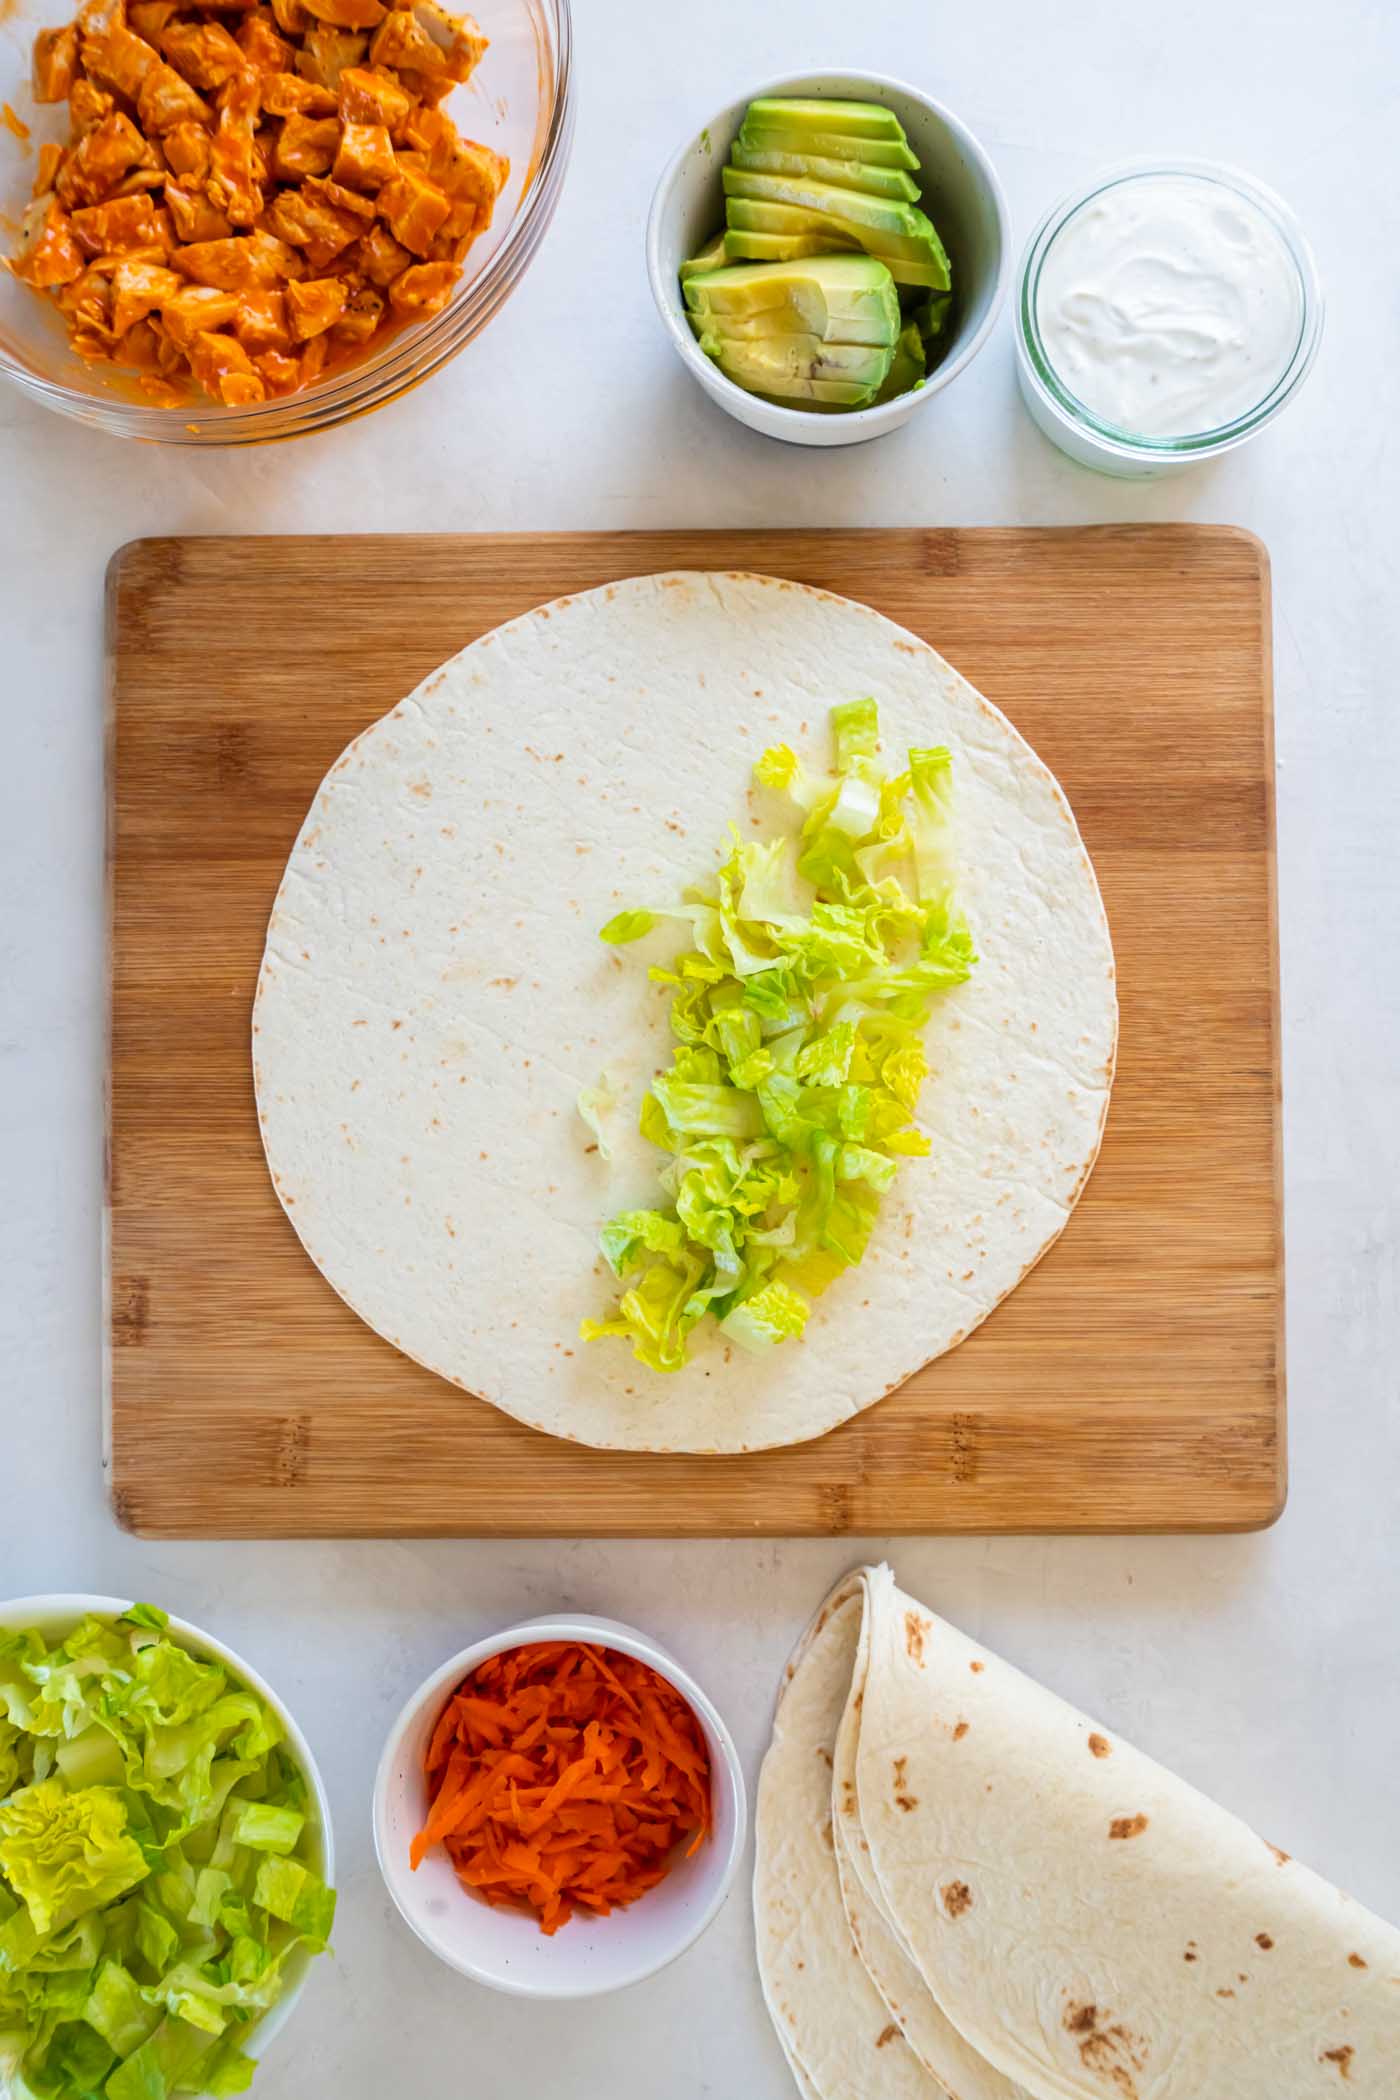 Tortilla with chopped romaine lettuce down the center.